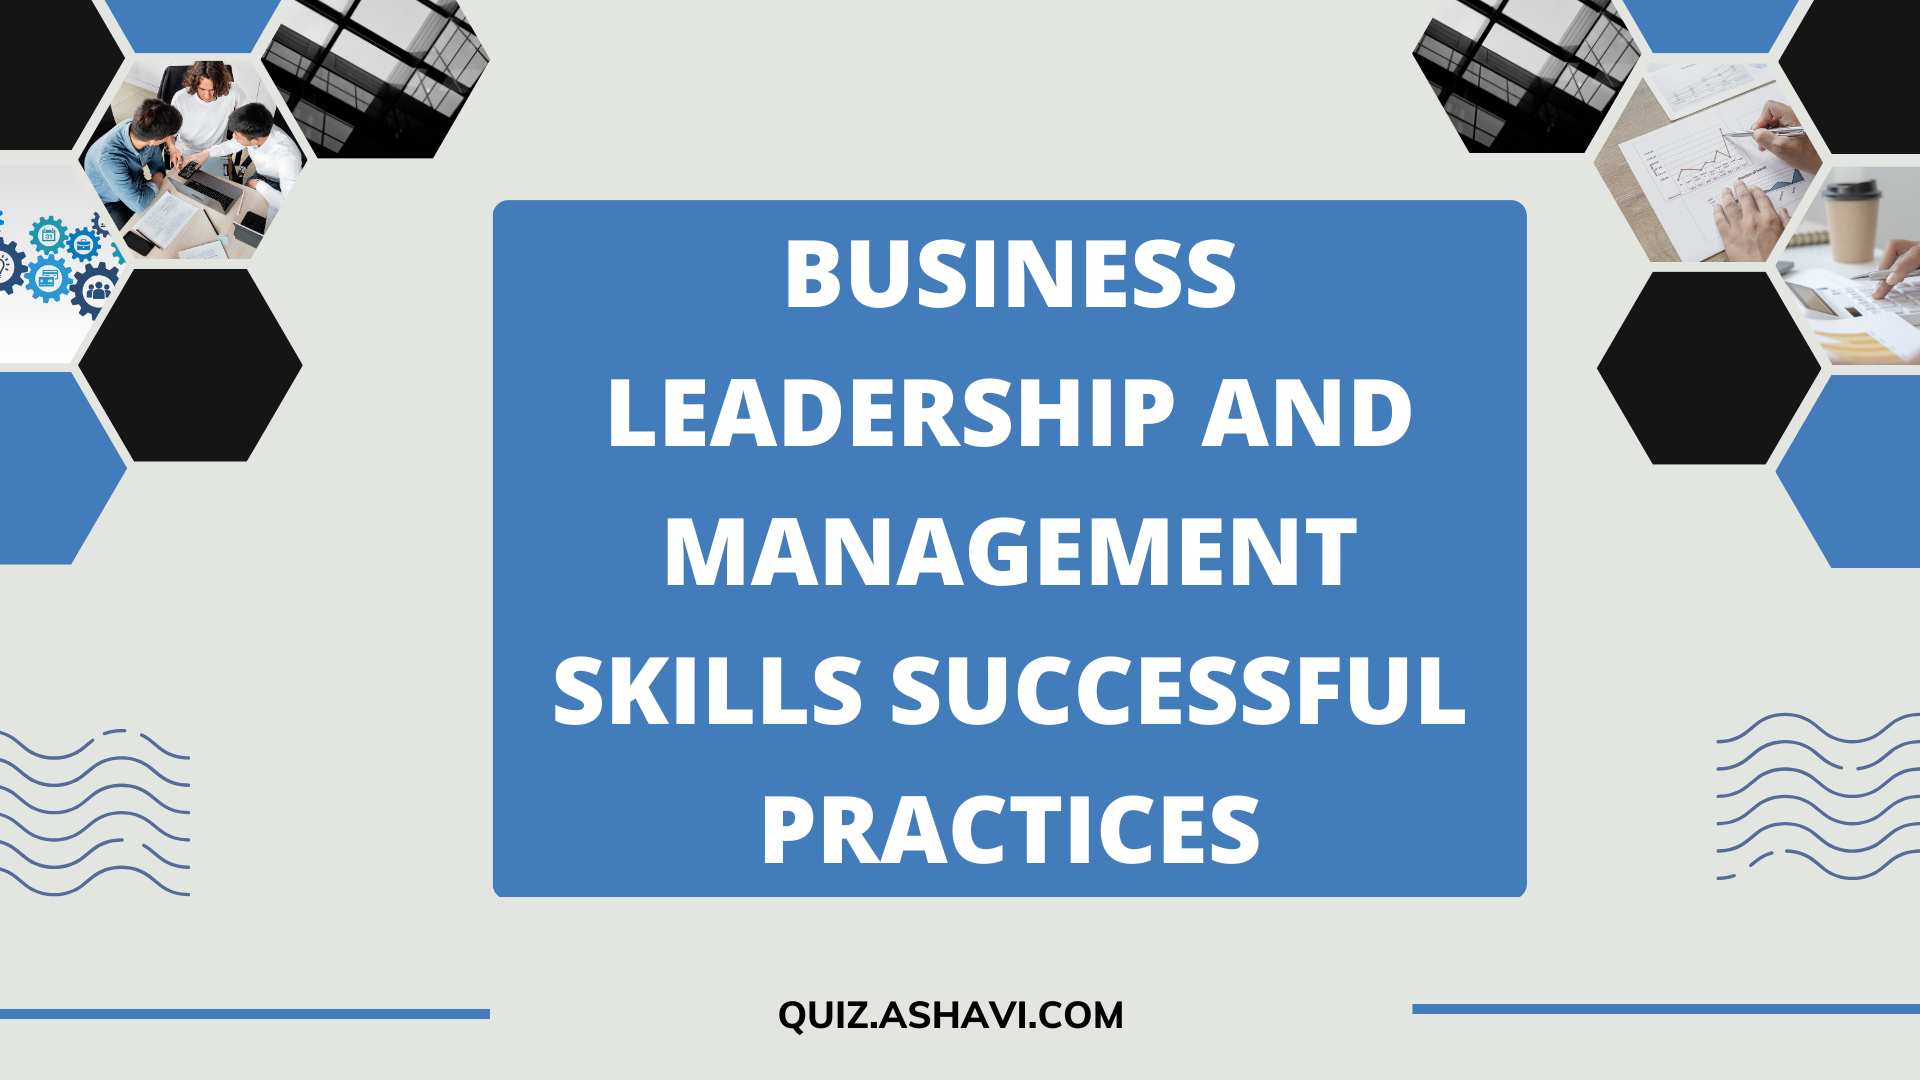 Business Leadership and Management Skills Successful Practices